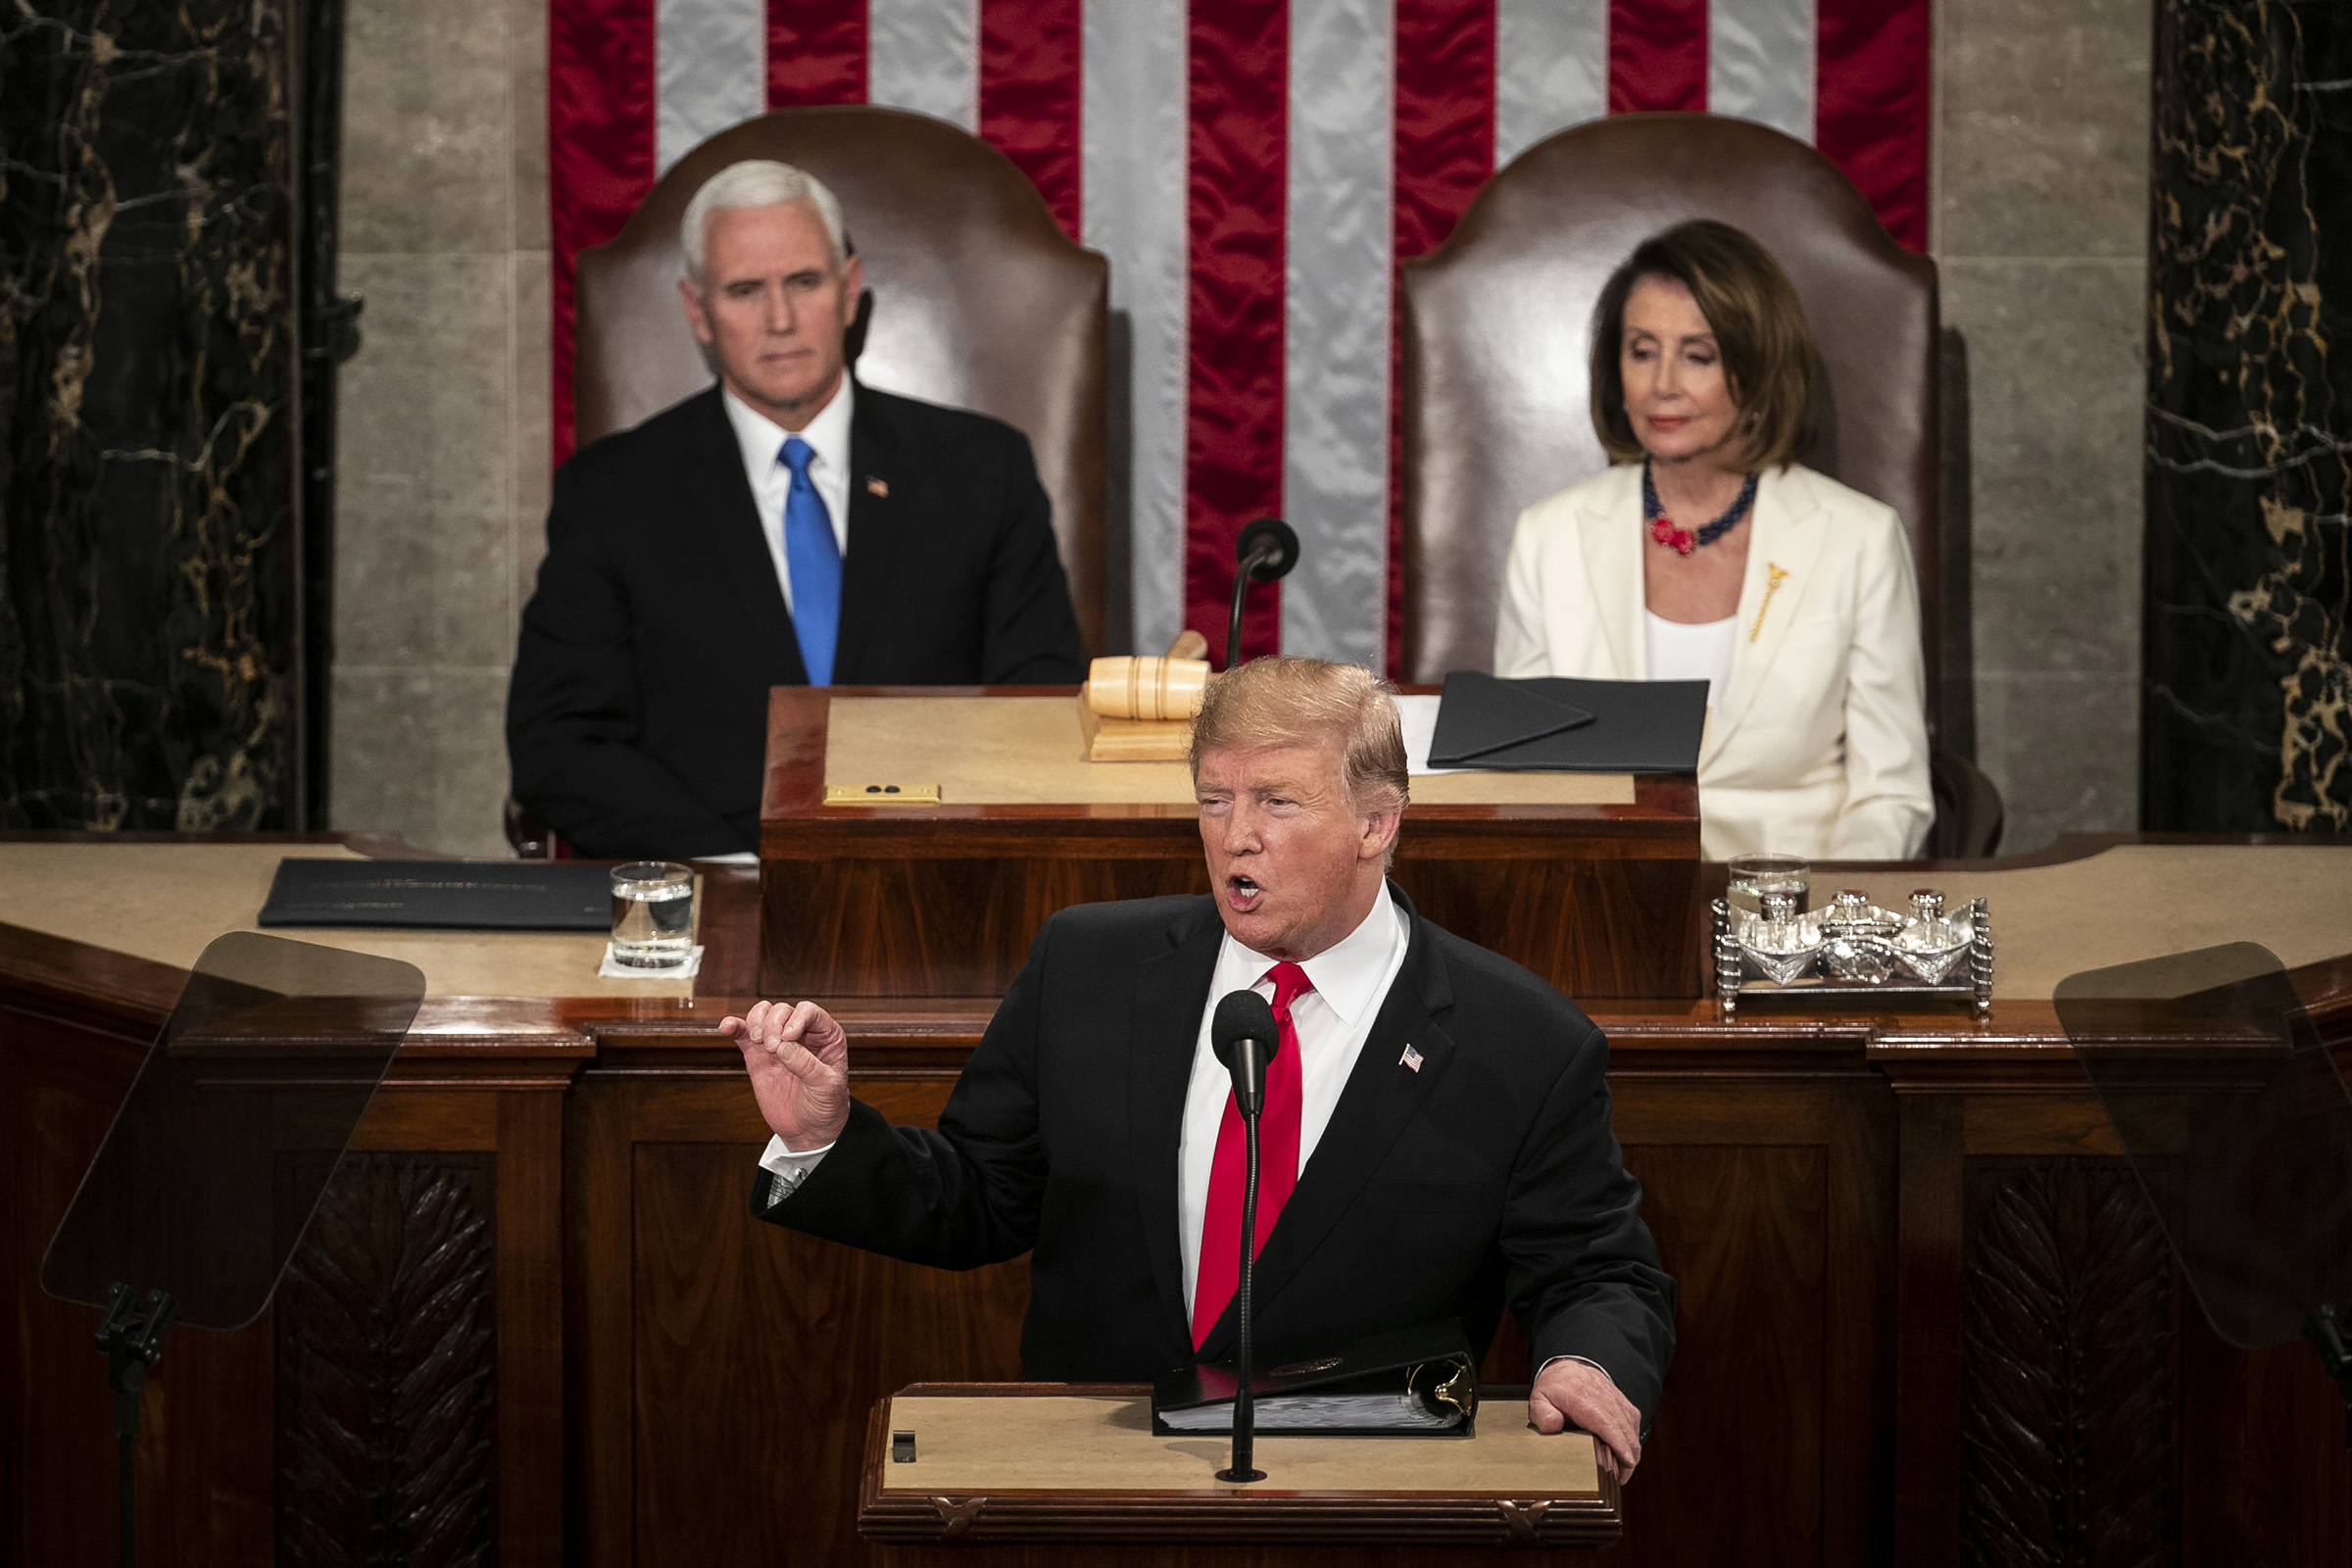 President Trump Delivers State Of The Union Address